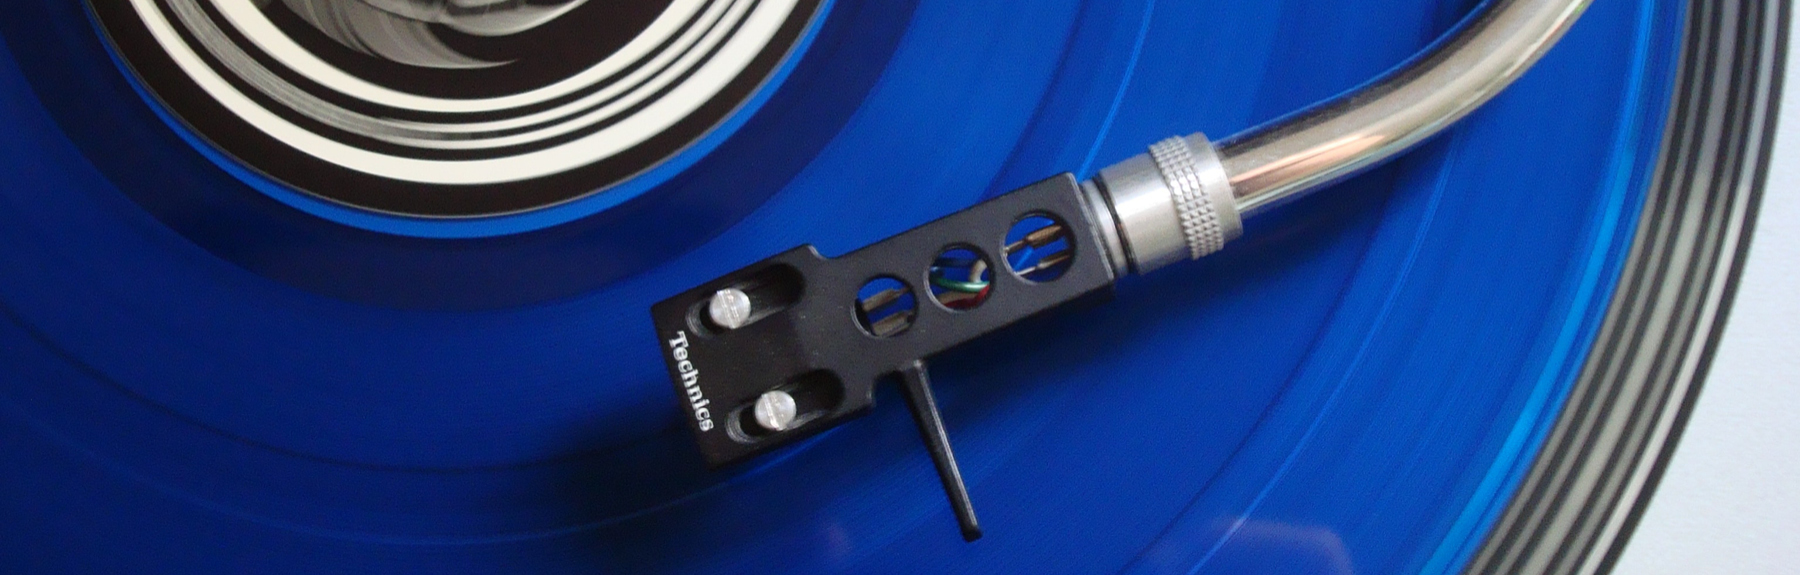 A record player playing a blue record